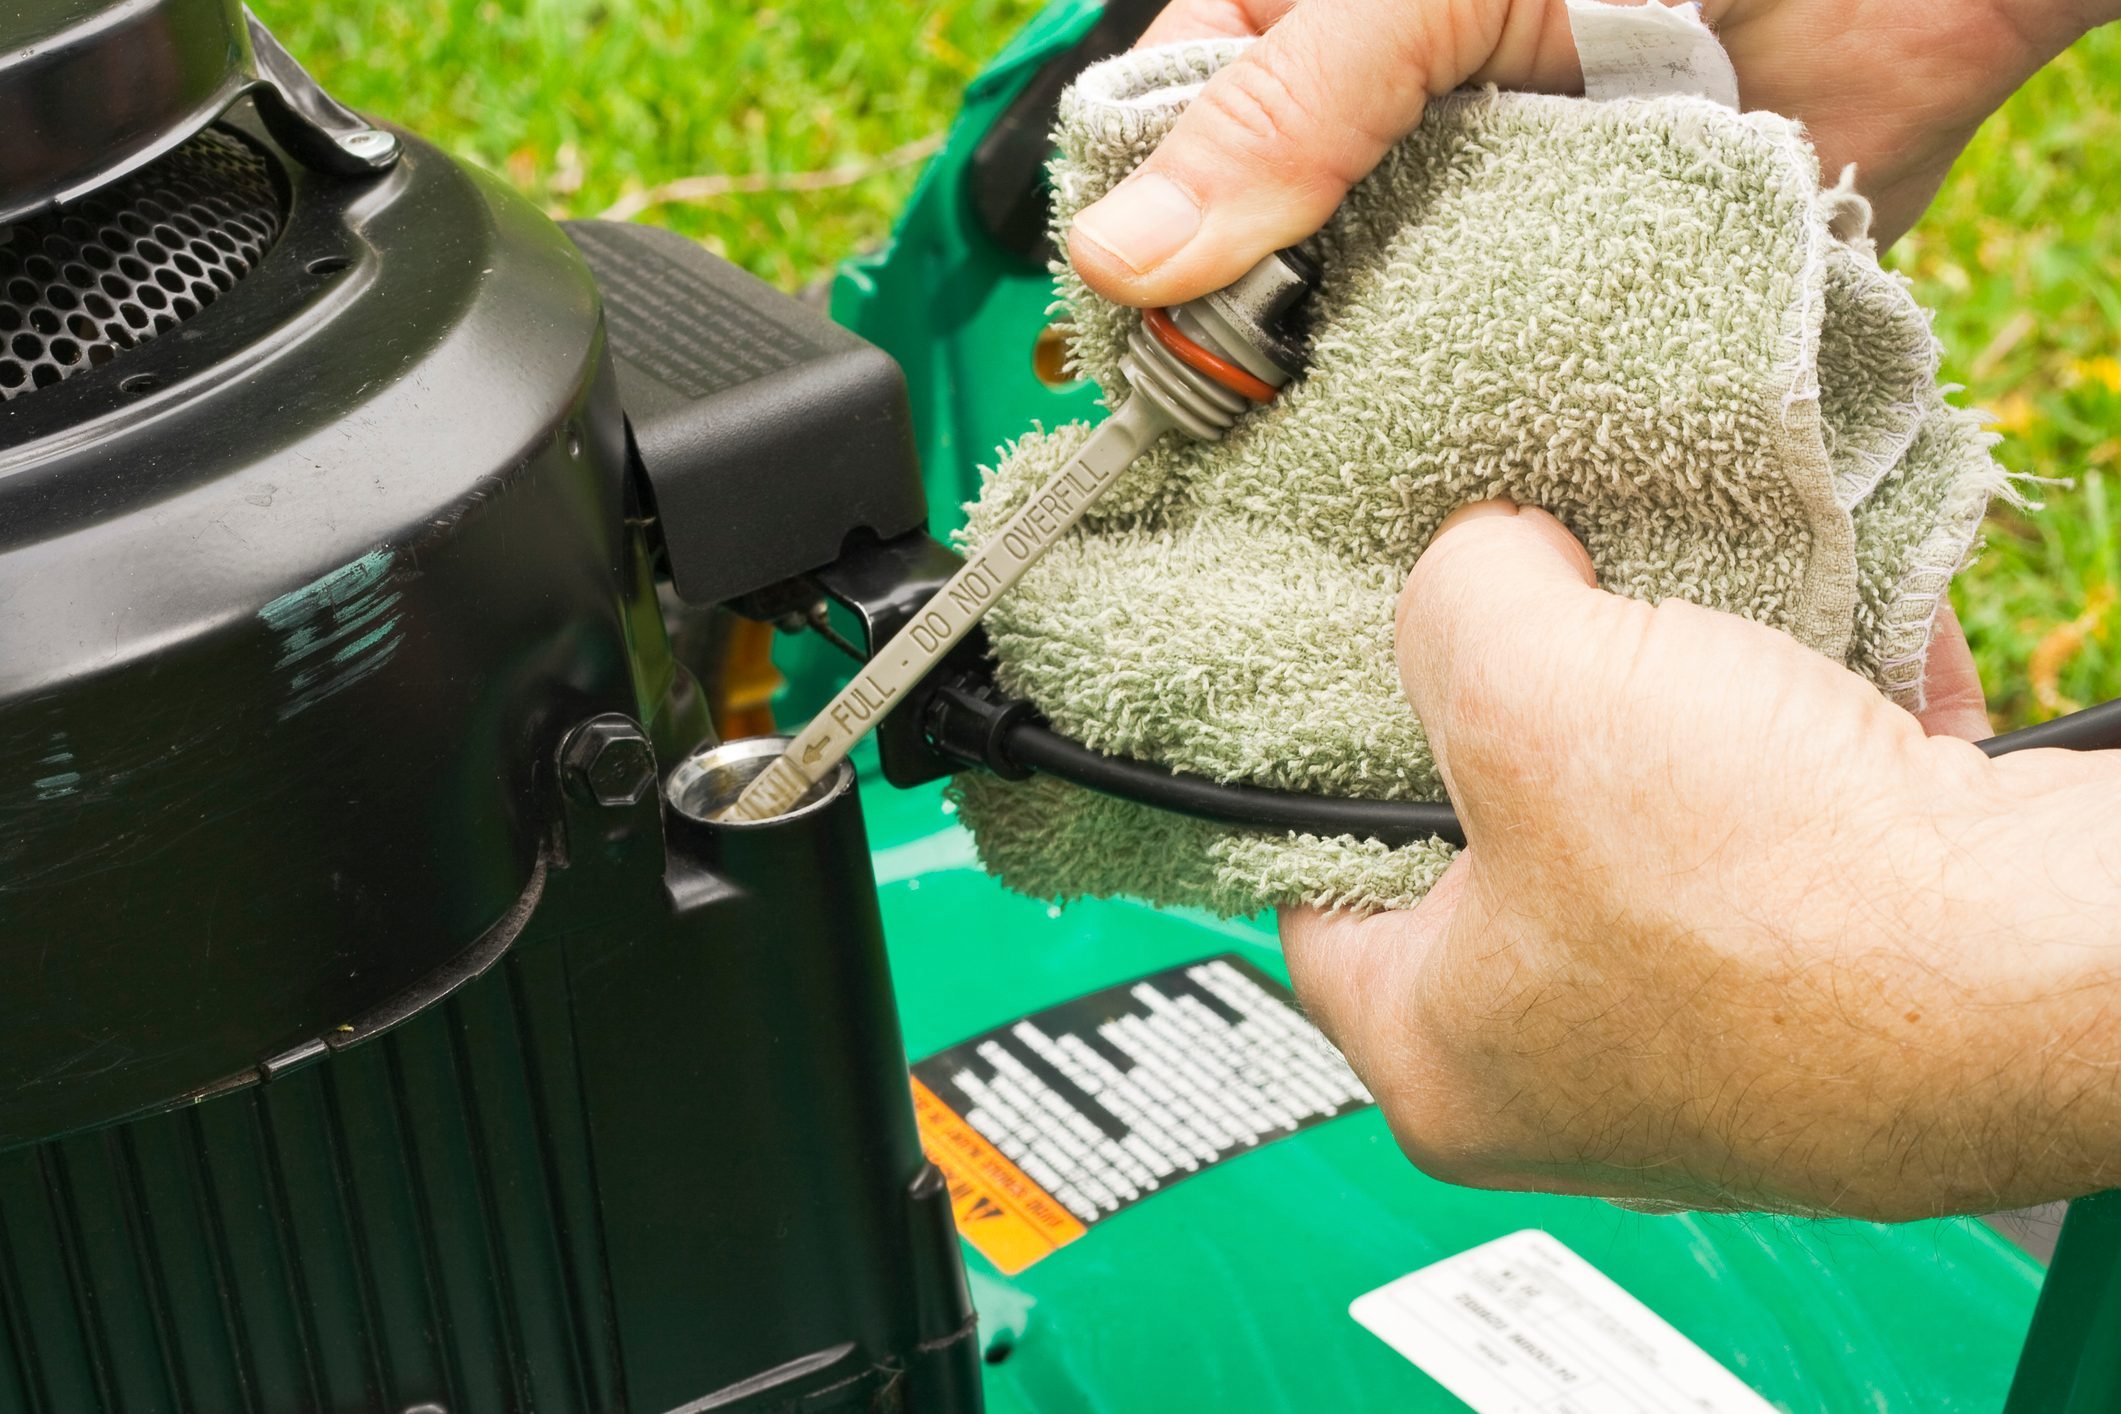 How to Check Oil in a Lawn Mower